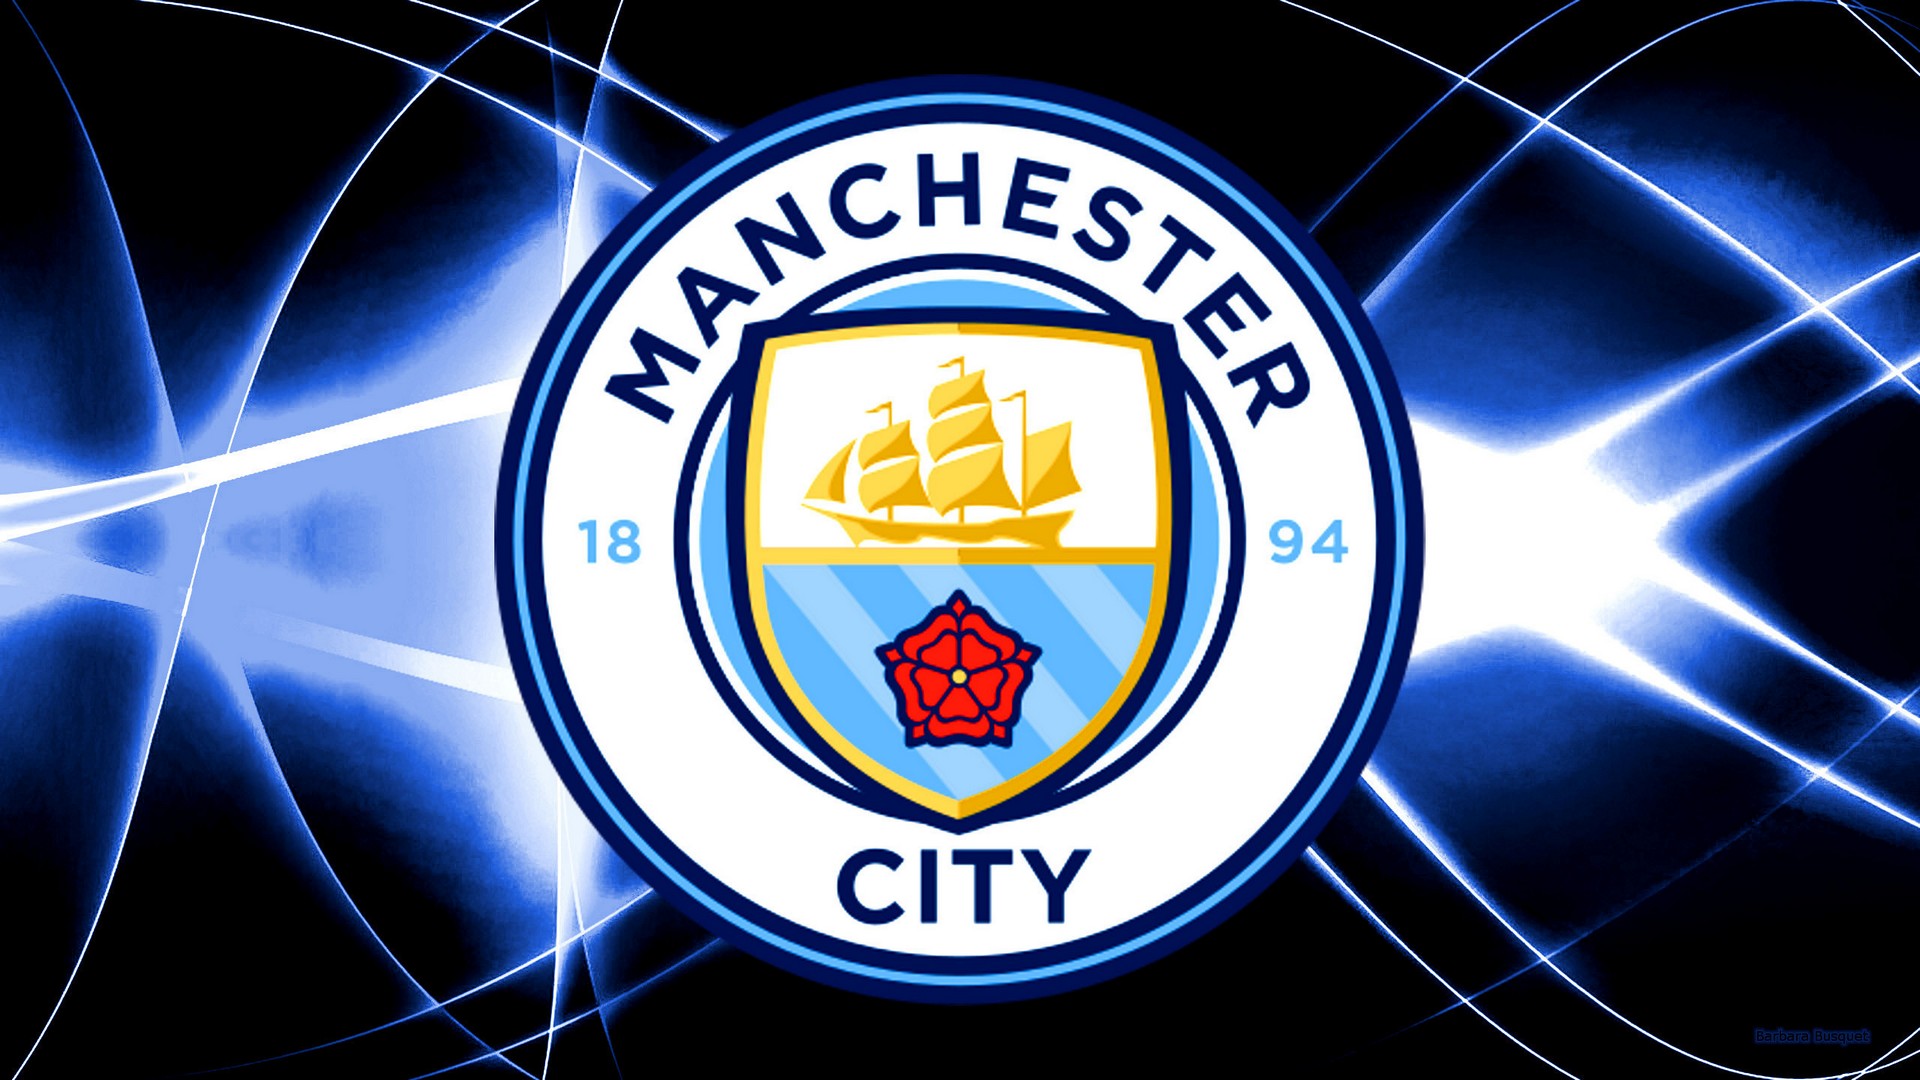 Wallpapers Manchester City FC with high-resolution 1920x1080 pixel. You can use this wallpaper for your Desktop Computers, Mac Screensavers, Windows Backgrounds, iPhone Wallpapers, Tablet or Android Lock screen and another Mobile device